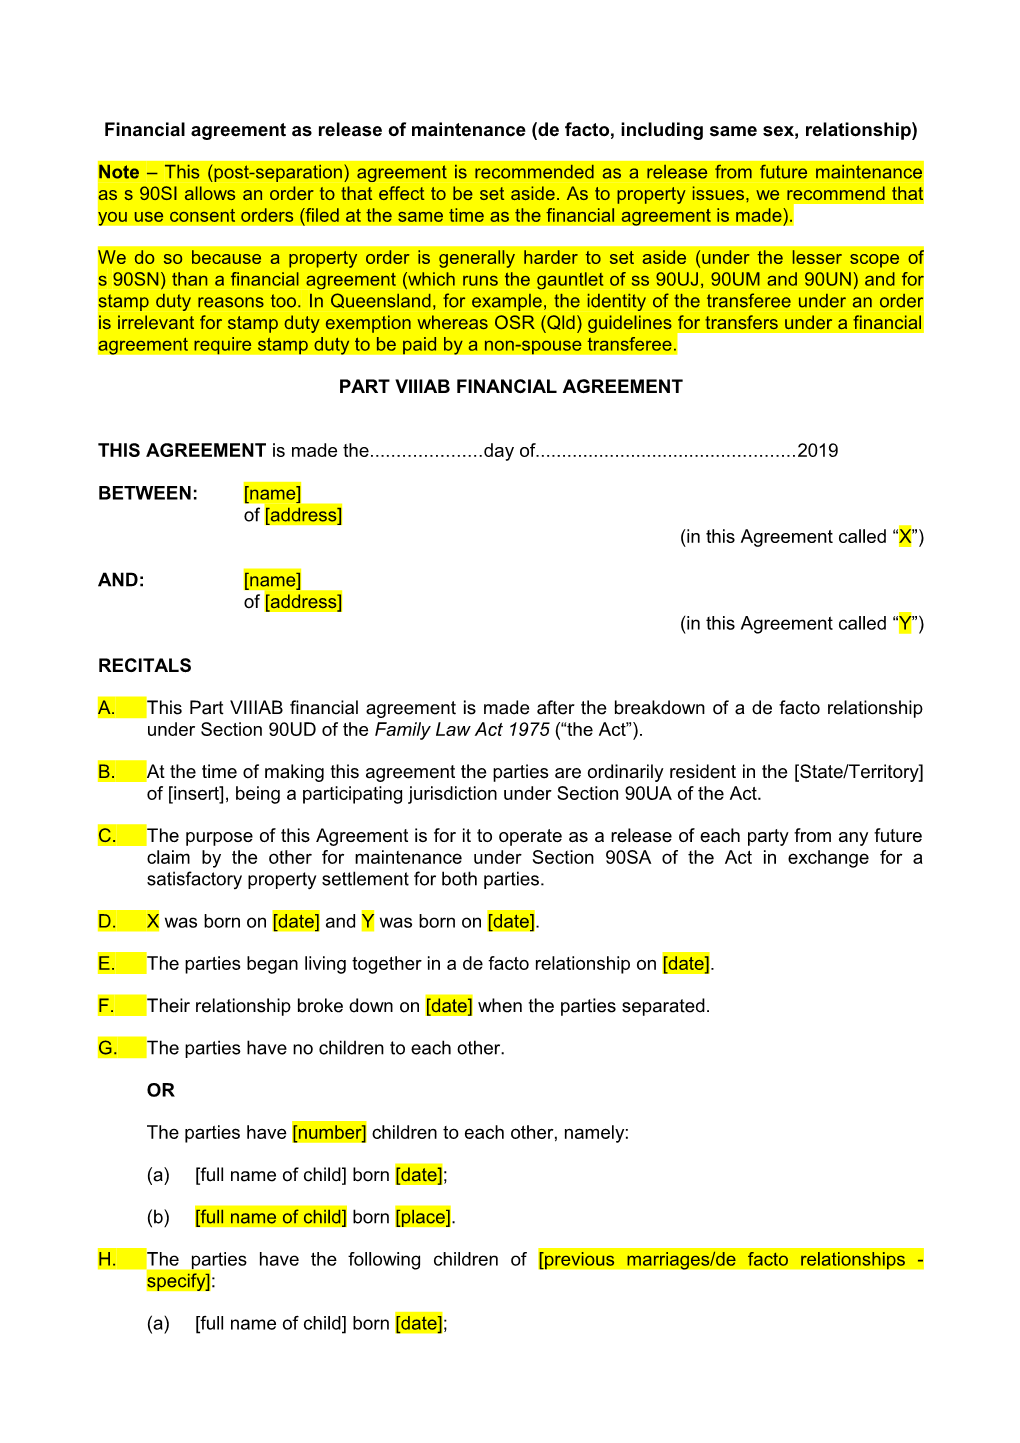 Sample of Financial Agreement As Release of Spousal Maintenance